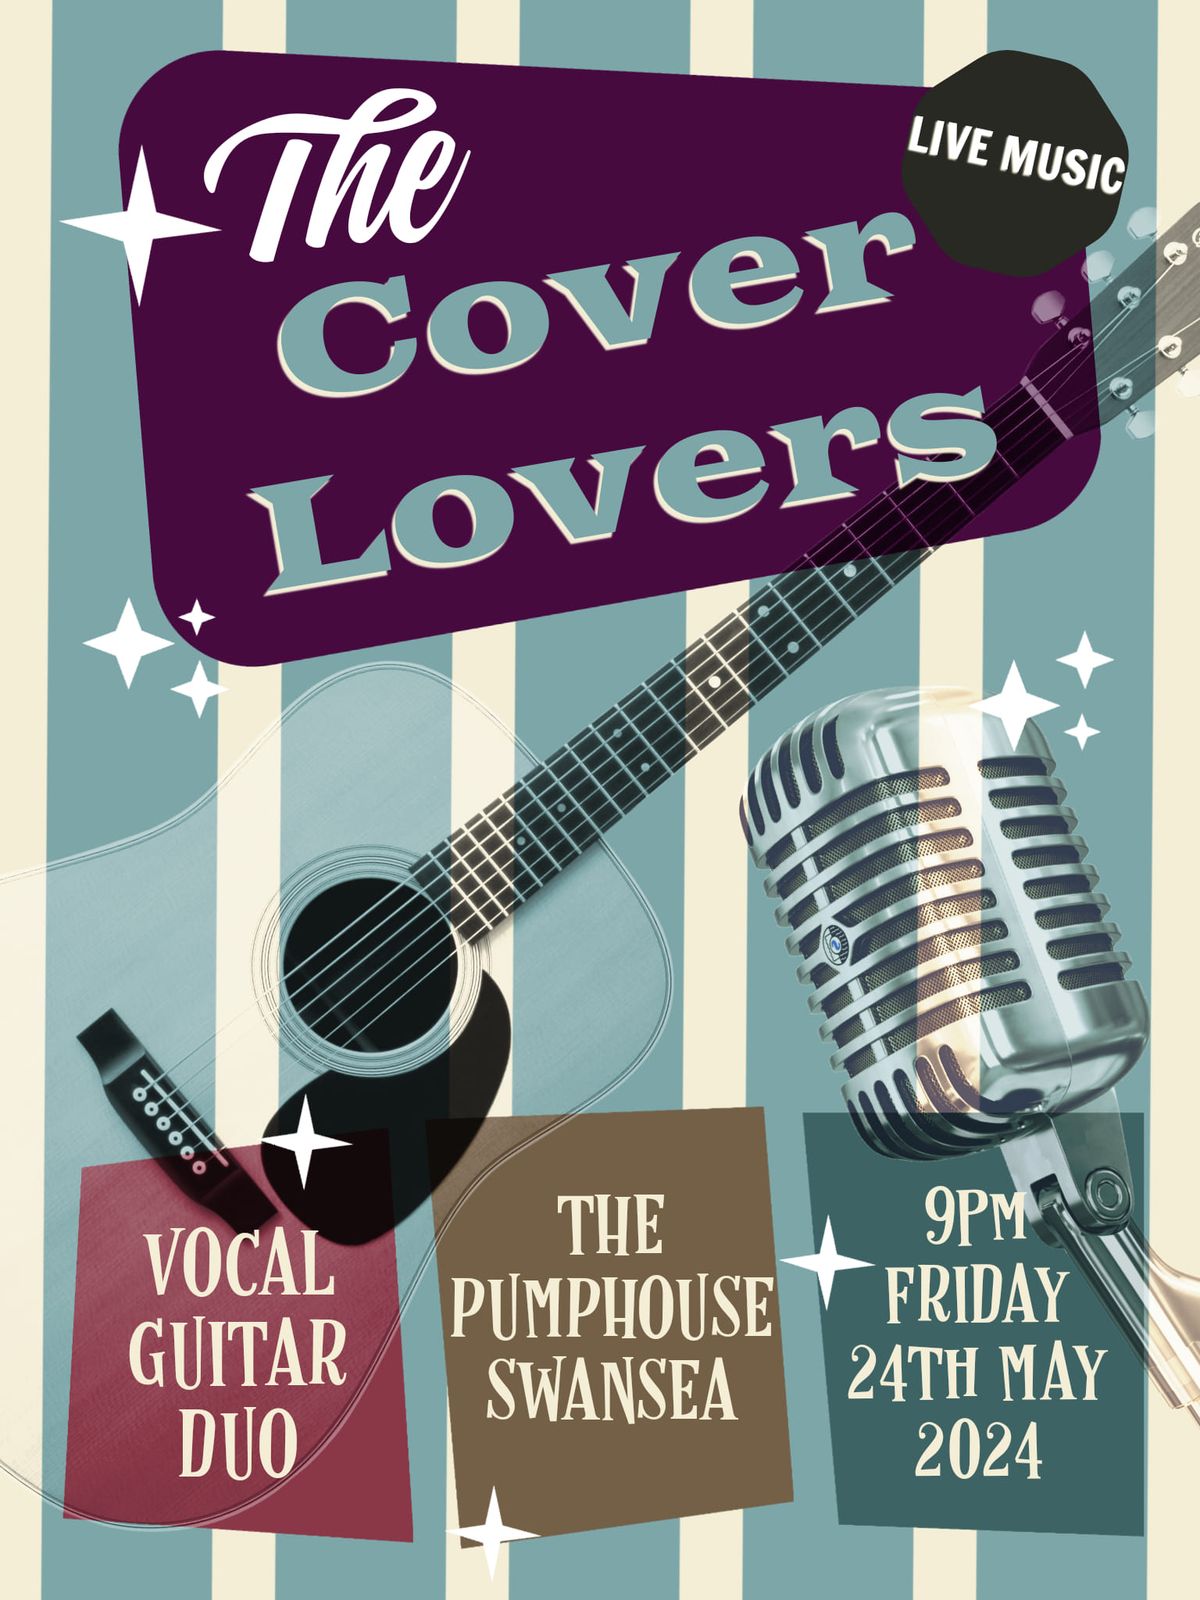 The Cover Lovers Live At The Pump House Swansea